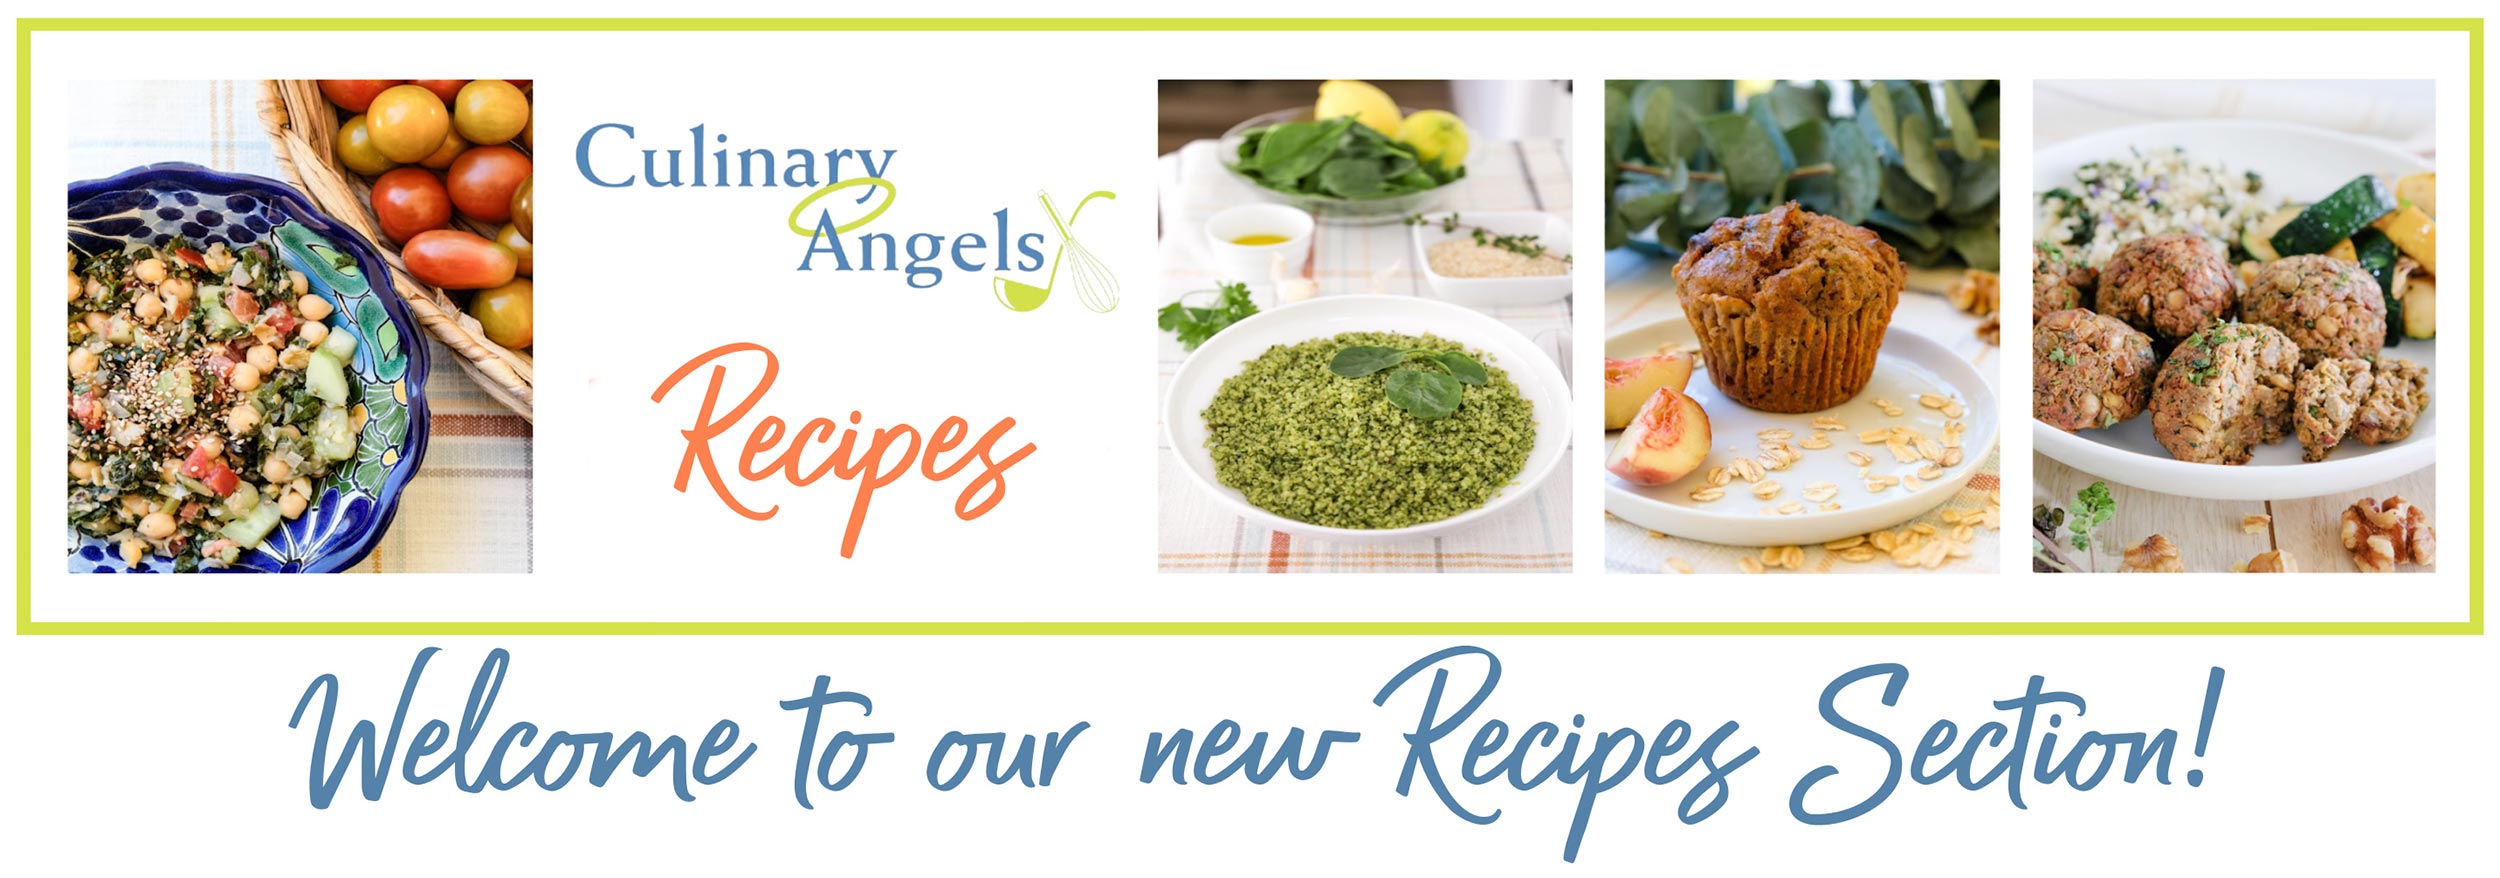 Welcome to our new recipe section!